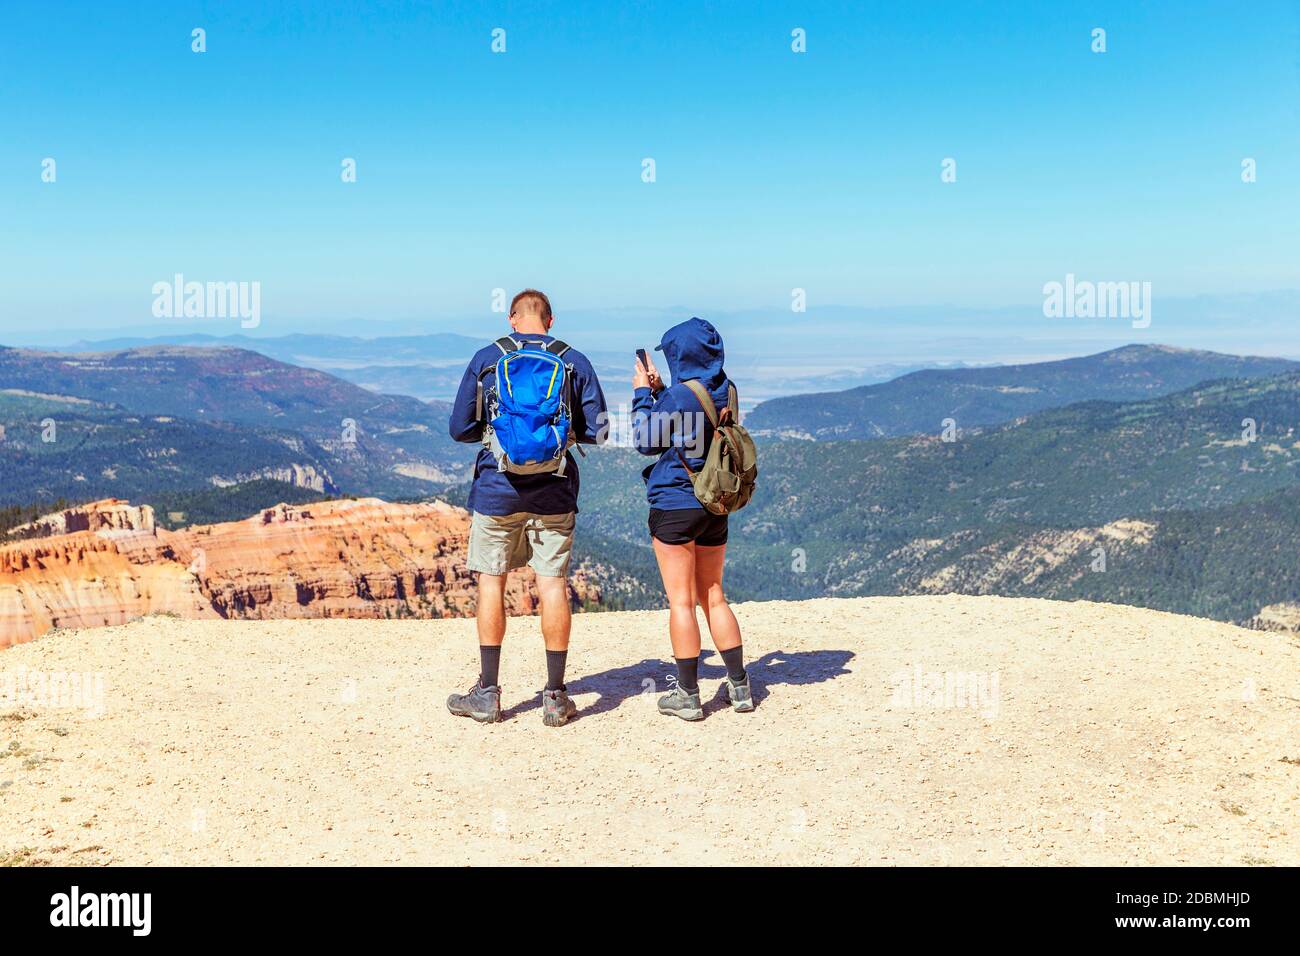 A couple enjoy the scenic view of Cedar Breaks National Monument, a U.S. National Monument located in the U.S. state of Utah near Cedar City. Cedar Br Stock Photo